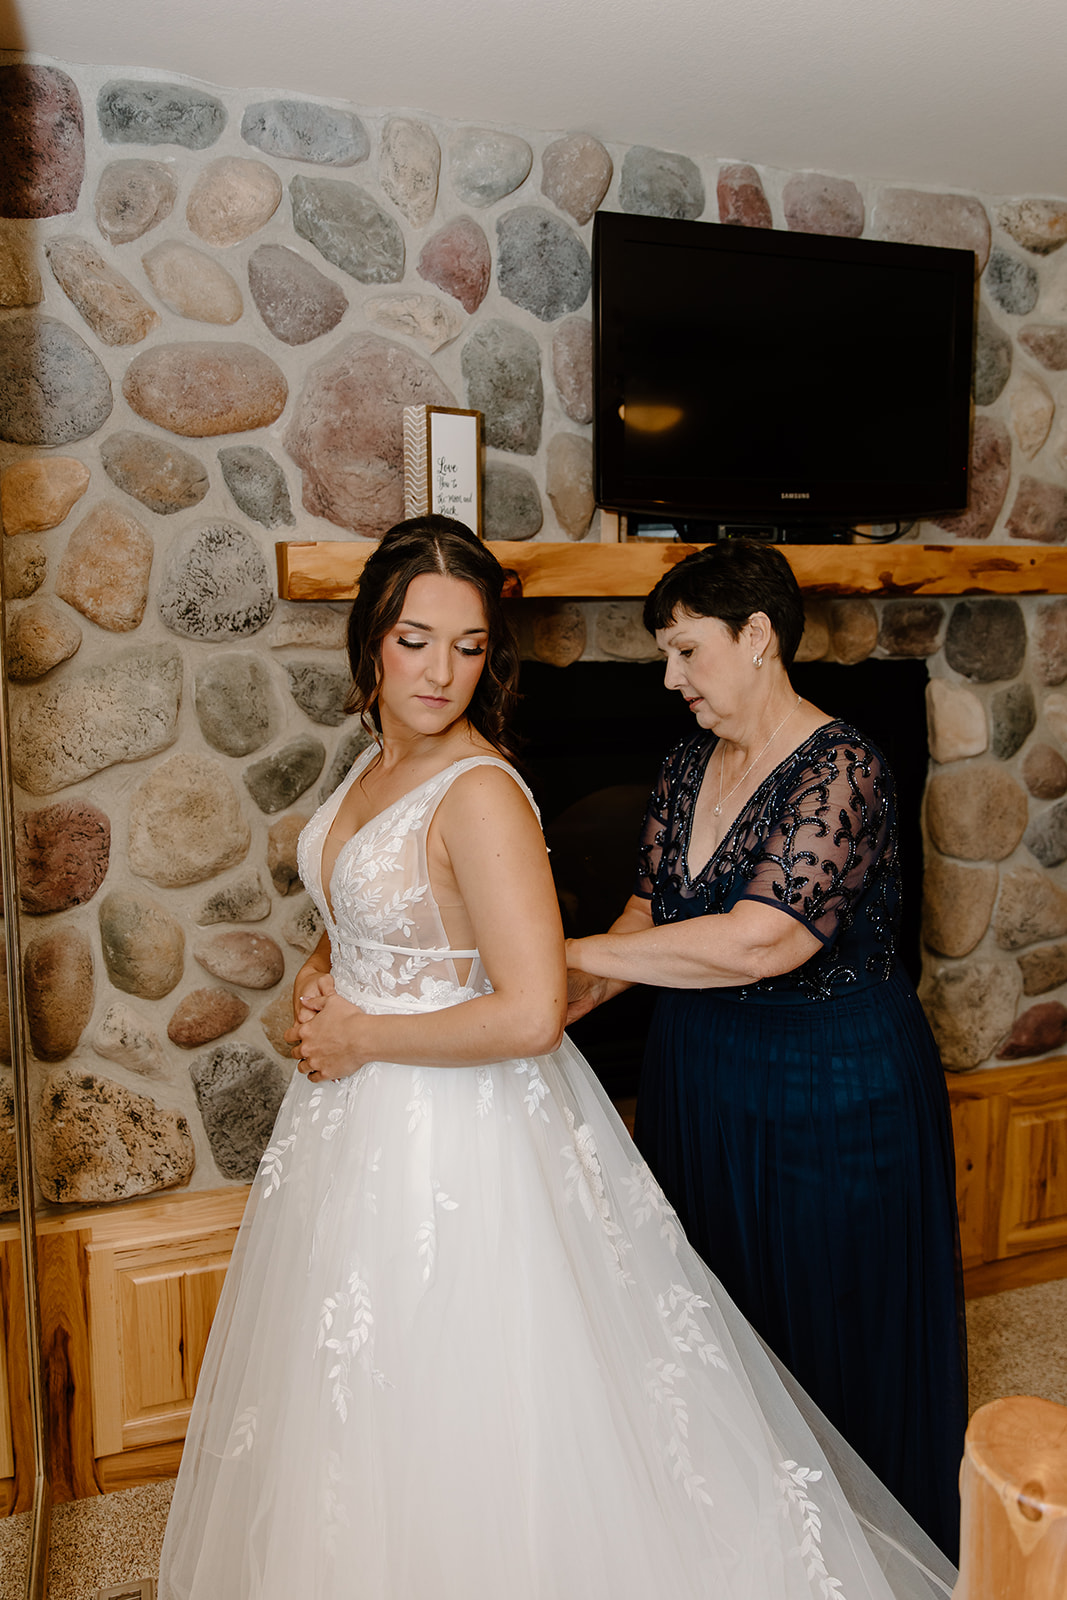 Mother zips up her daughter's wedding dress in front of a brick wall